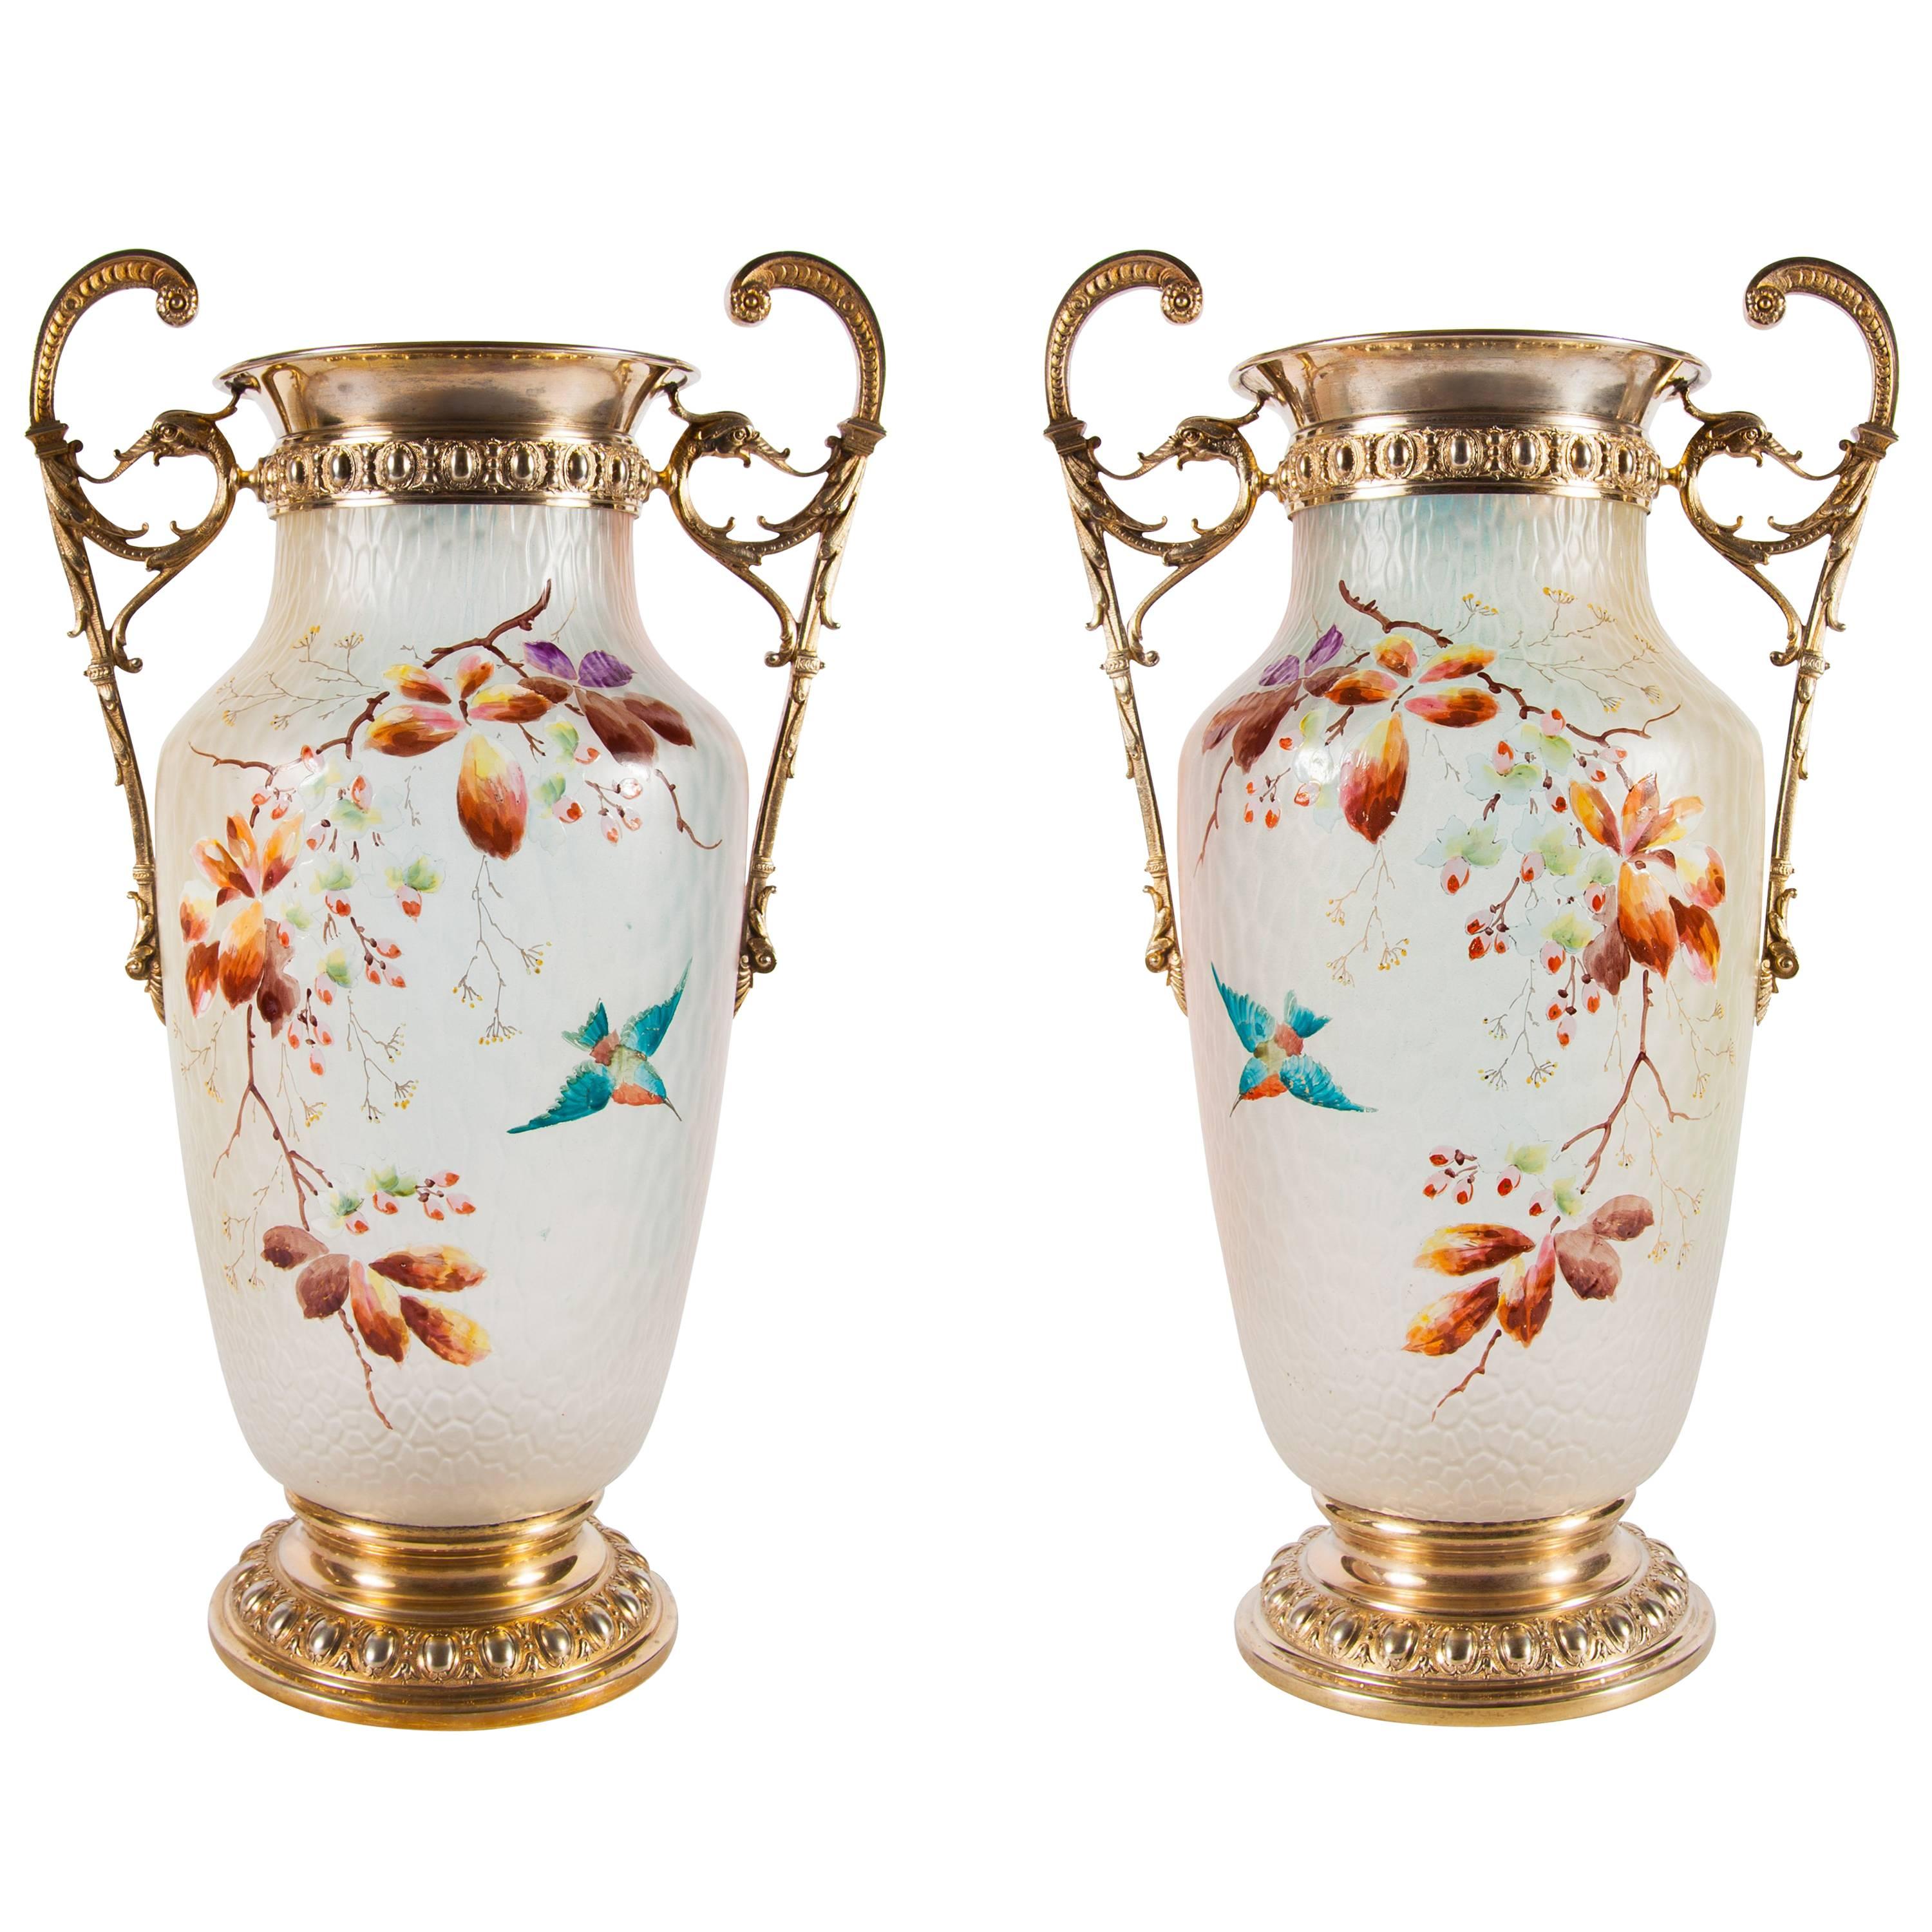 Pair of German Antique Enamel and Frosted Glass Vases by WMF